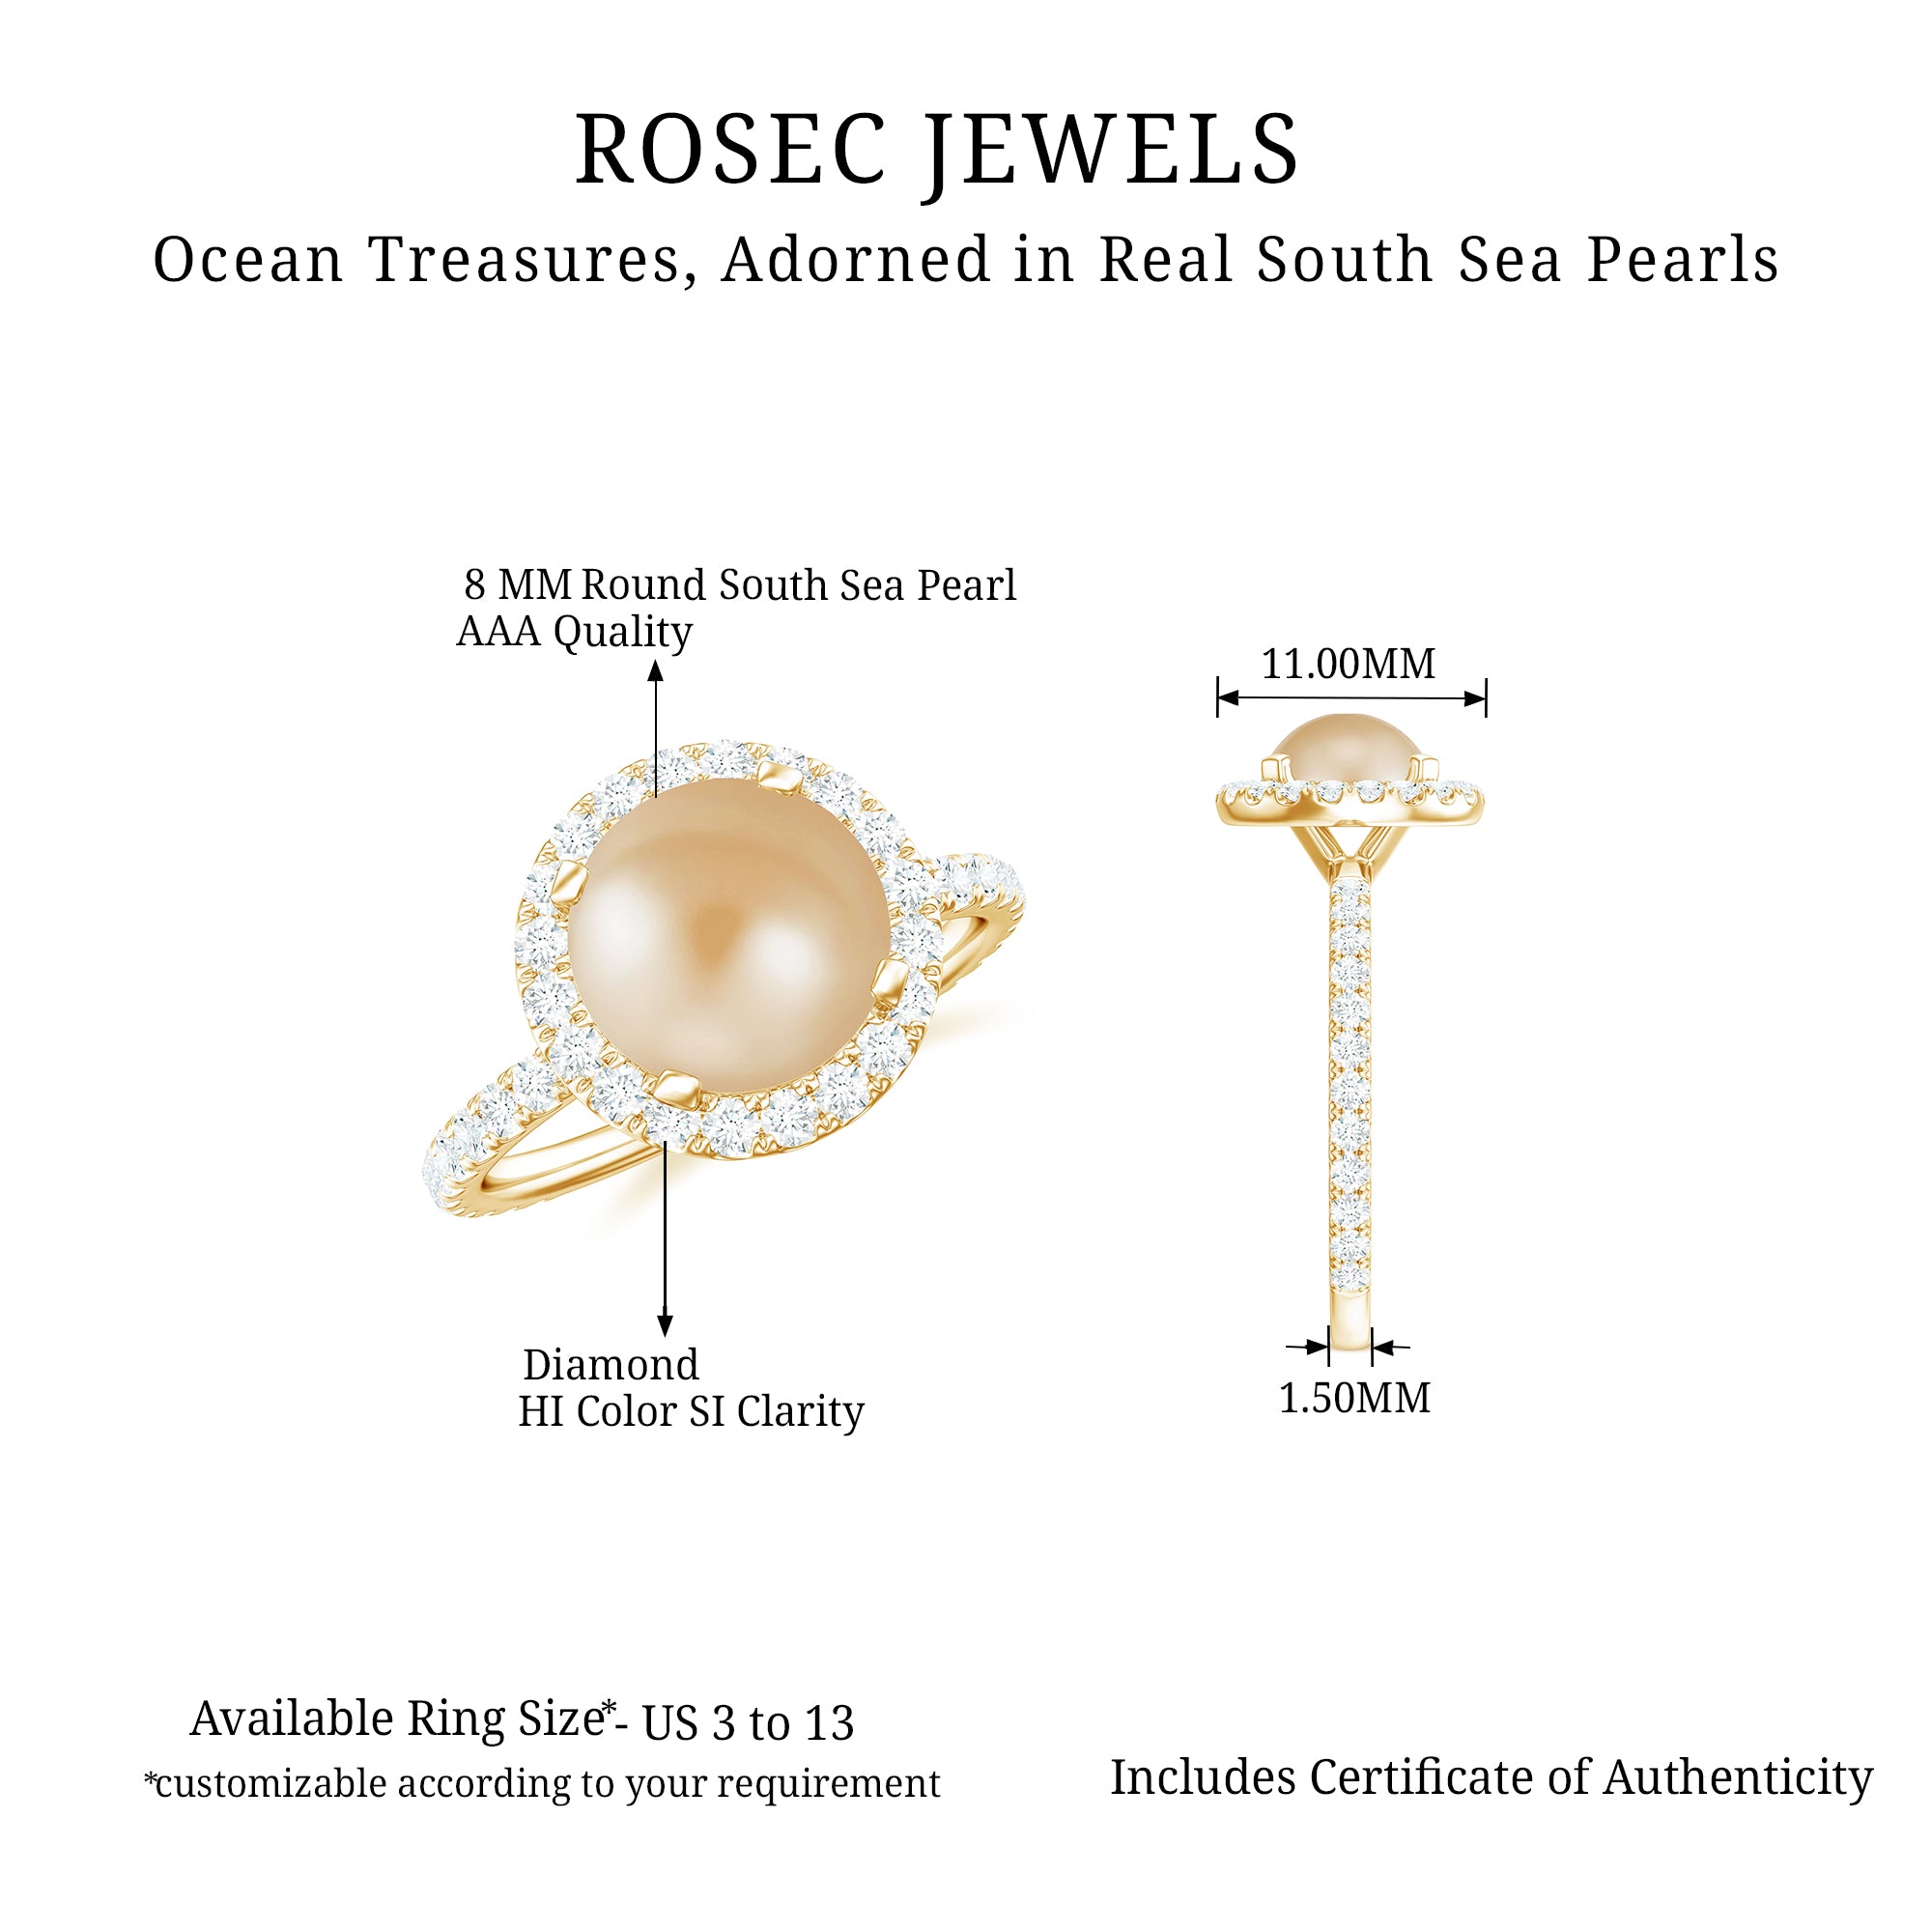 8 MM South Sea Pearl Engagement Ring with Diamond Floating Halo South Sea Pearl - ( AAA ) - Quality - Rosec Jewels